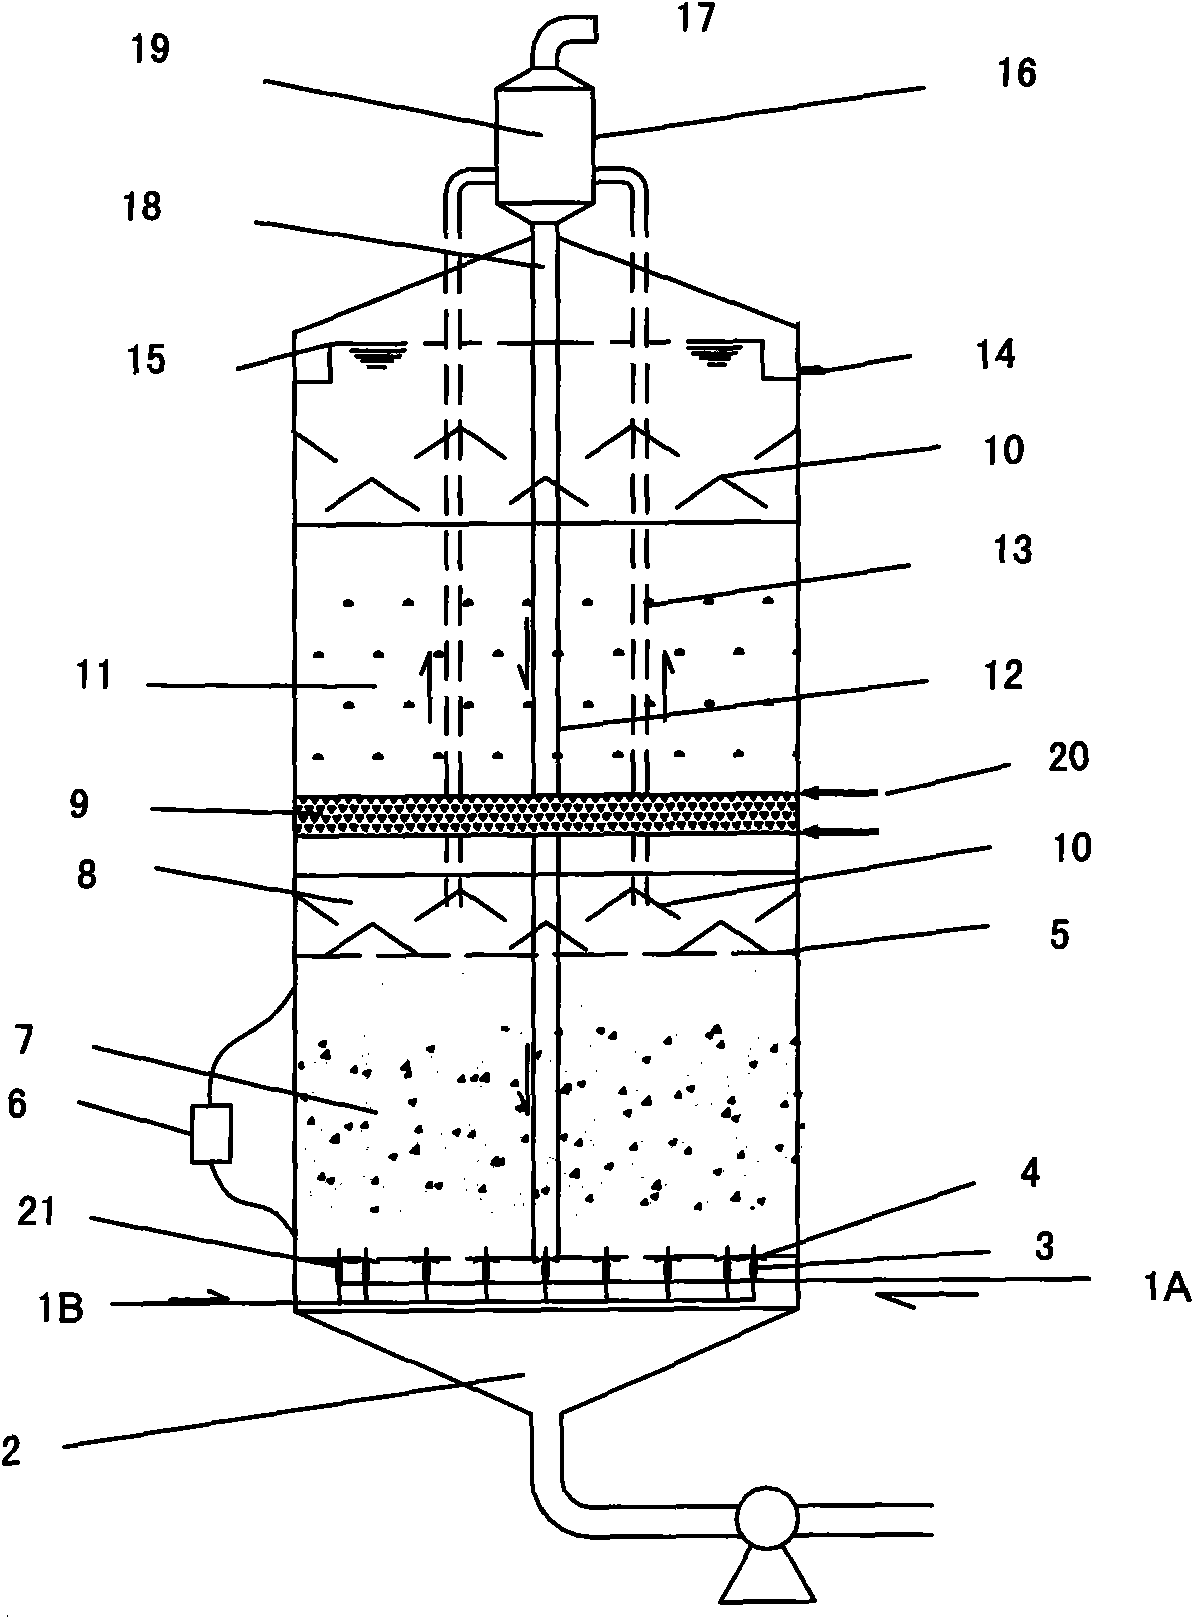 Electric field strengthening two-phase anaerobic reactor